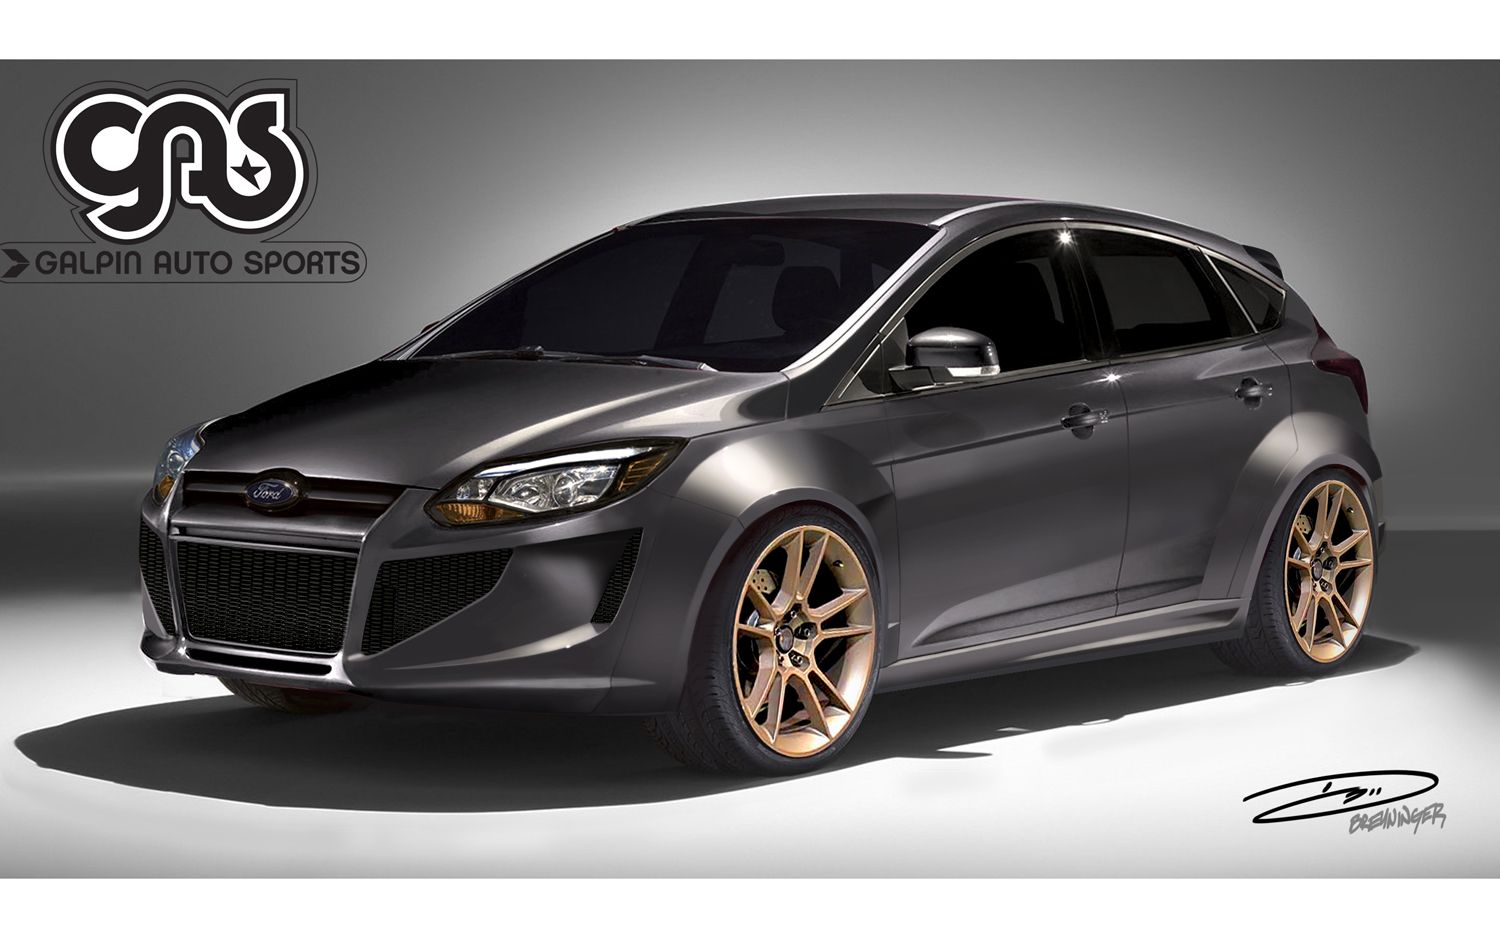 2012 Ford Focus ATK by Galpin Auto Sports